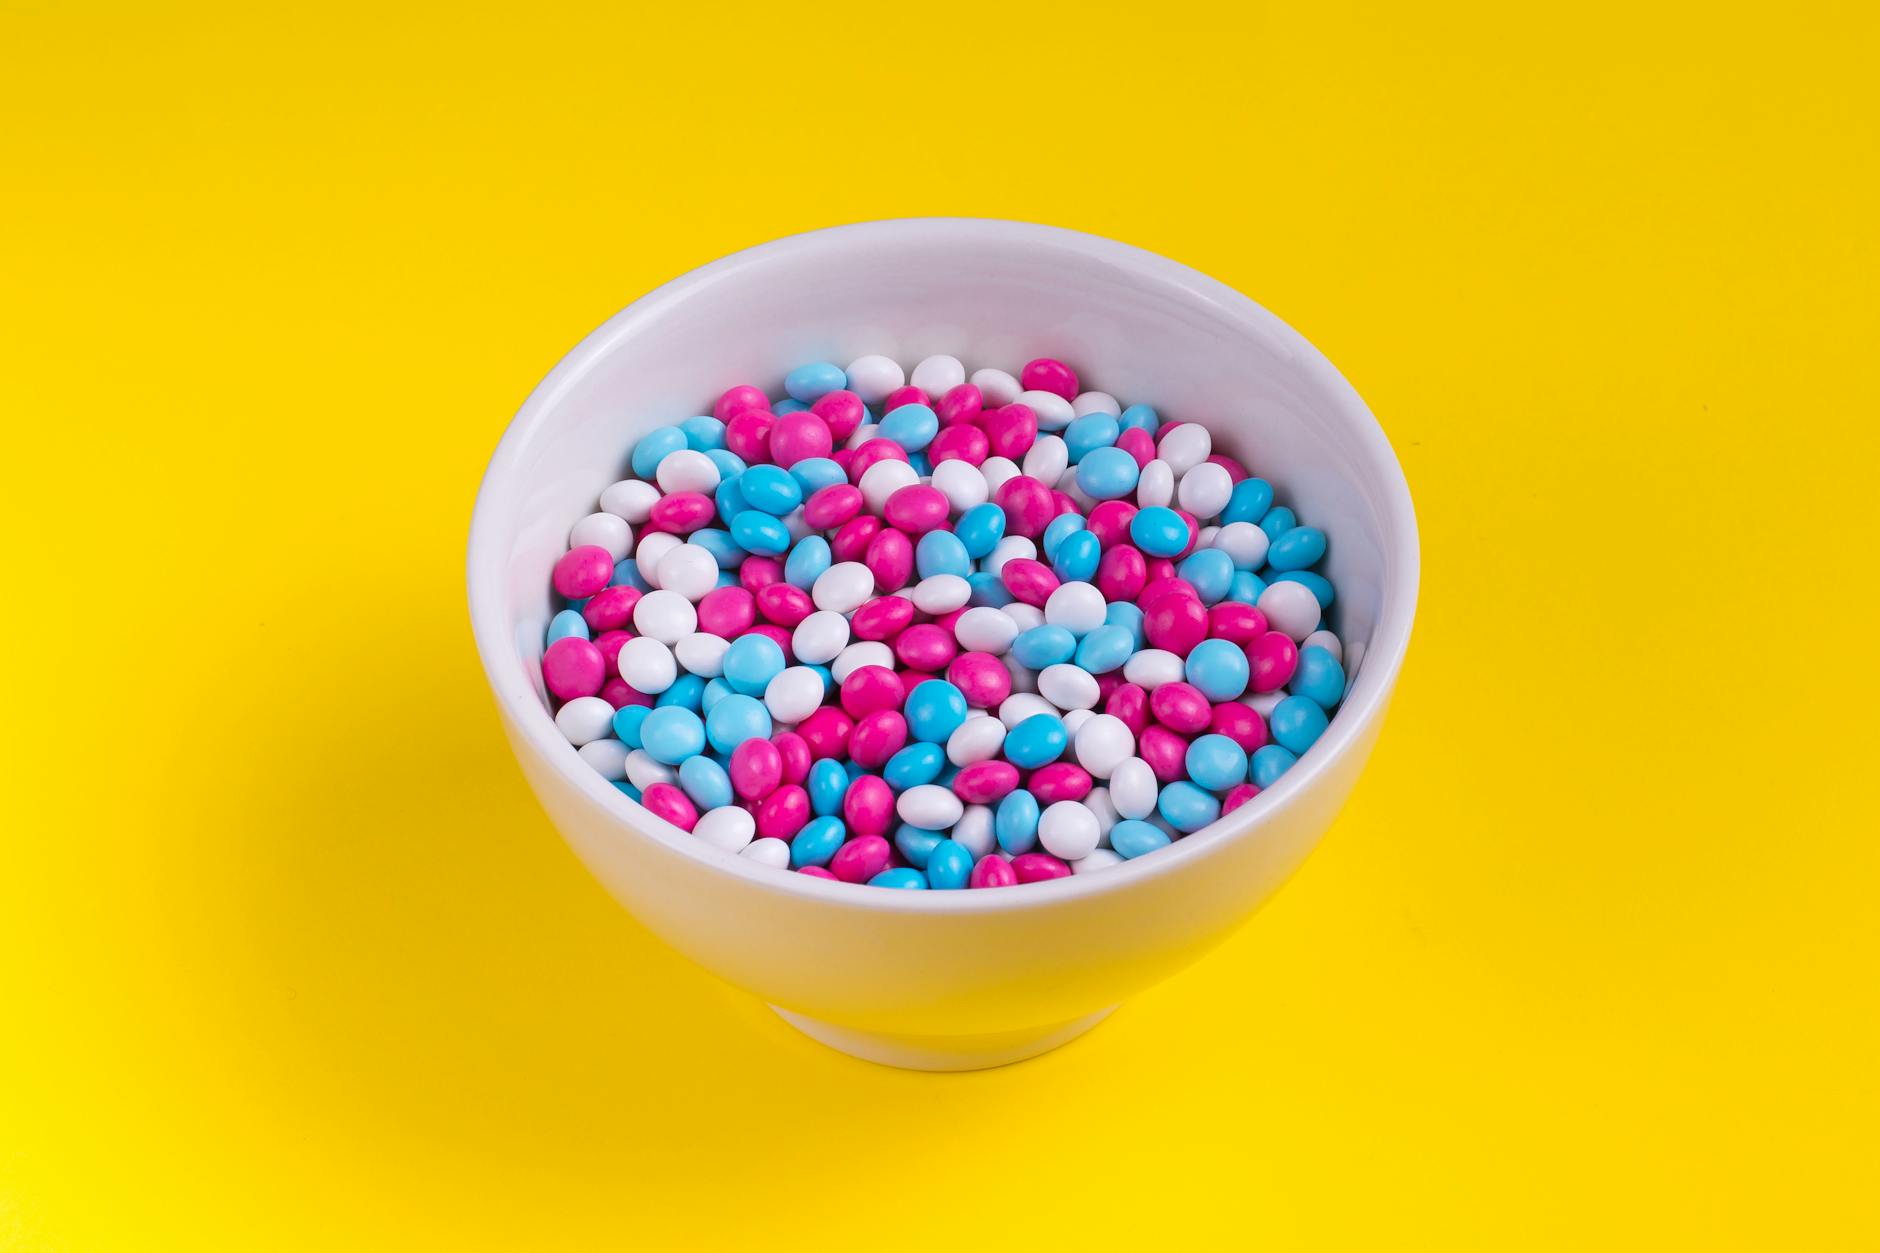 White Pink And Blue Candies In Bowl · Free Stock Photo